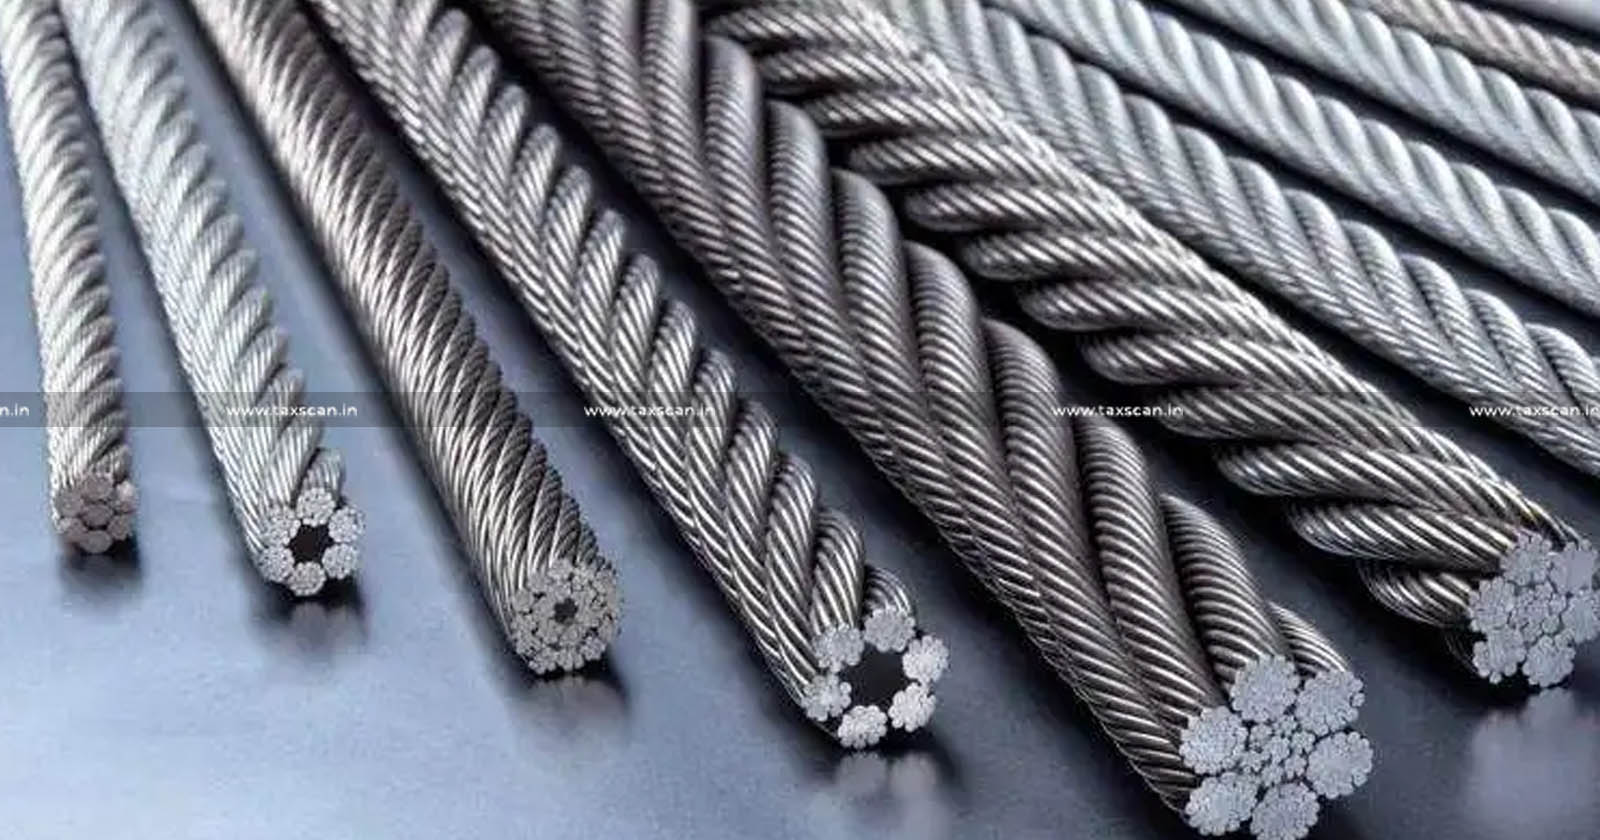 Compulsory Standard Steel Wires or Strands - Nylon or Wire Ropes and Wire mesh - DPIIT notifies QC Order - TAXSCAN